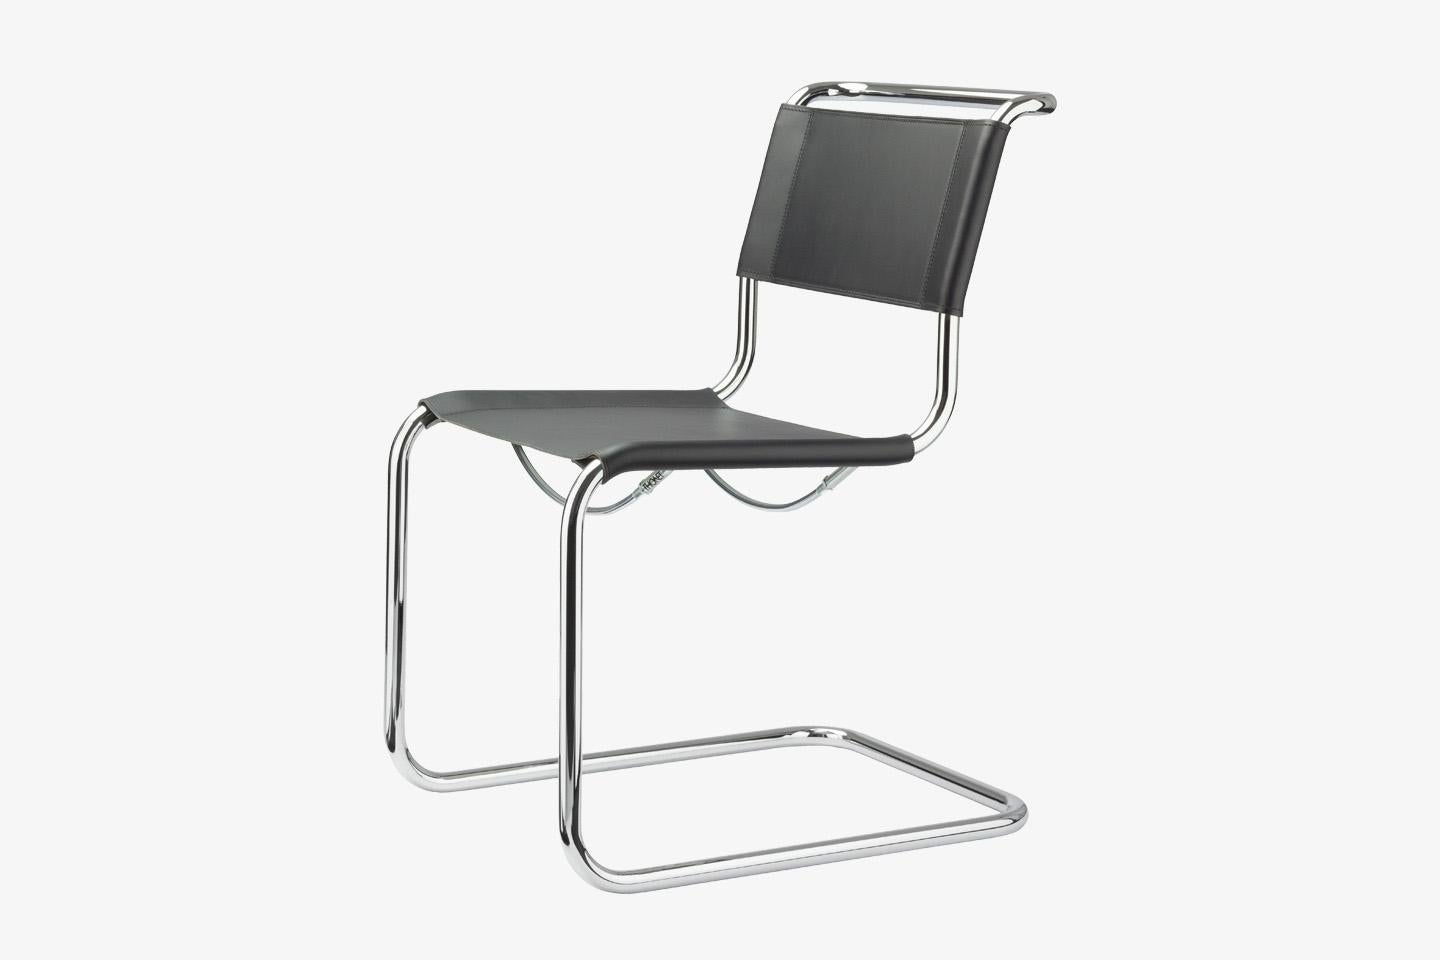 Cubic form, clear design, fine proportions, and flexing movement: The development of the perfected cantilever chairs S 33 and S 34, among the first of their kind, today combines zeitgeist and a sense of tradition. “Why four legs if two will